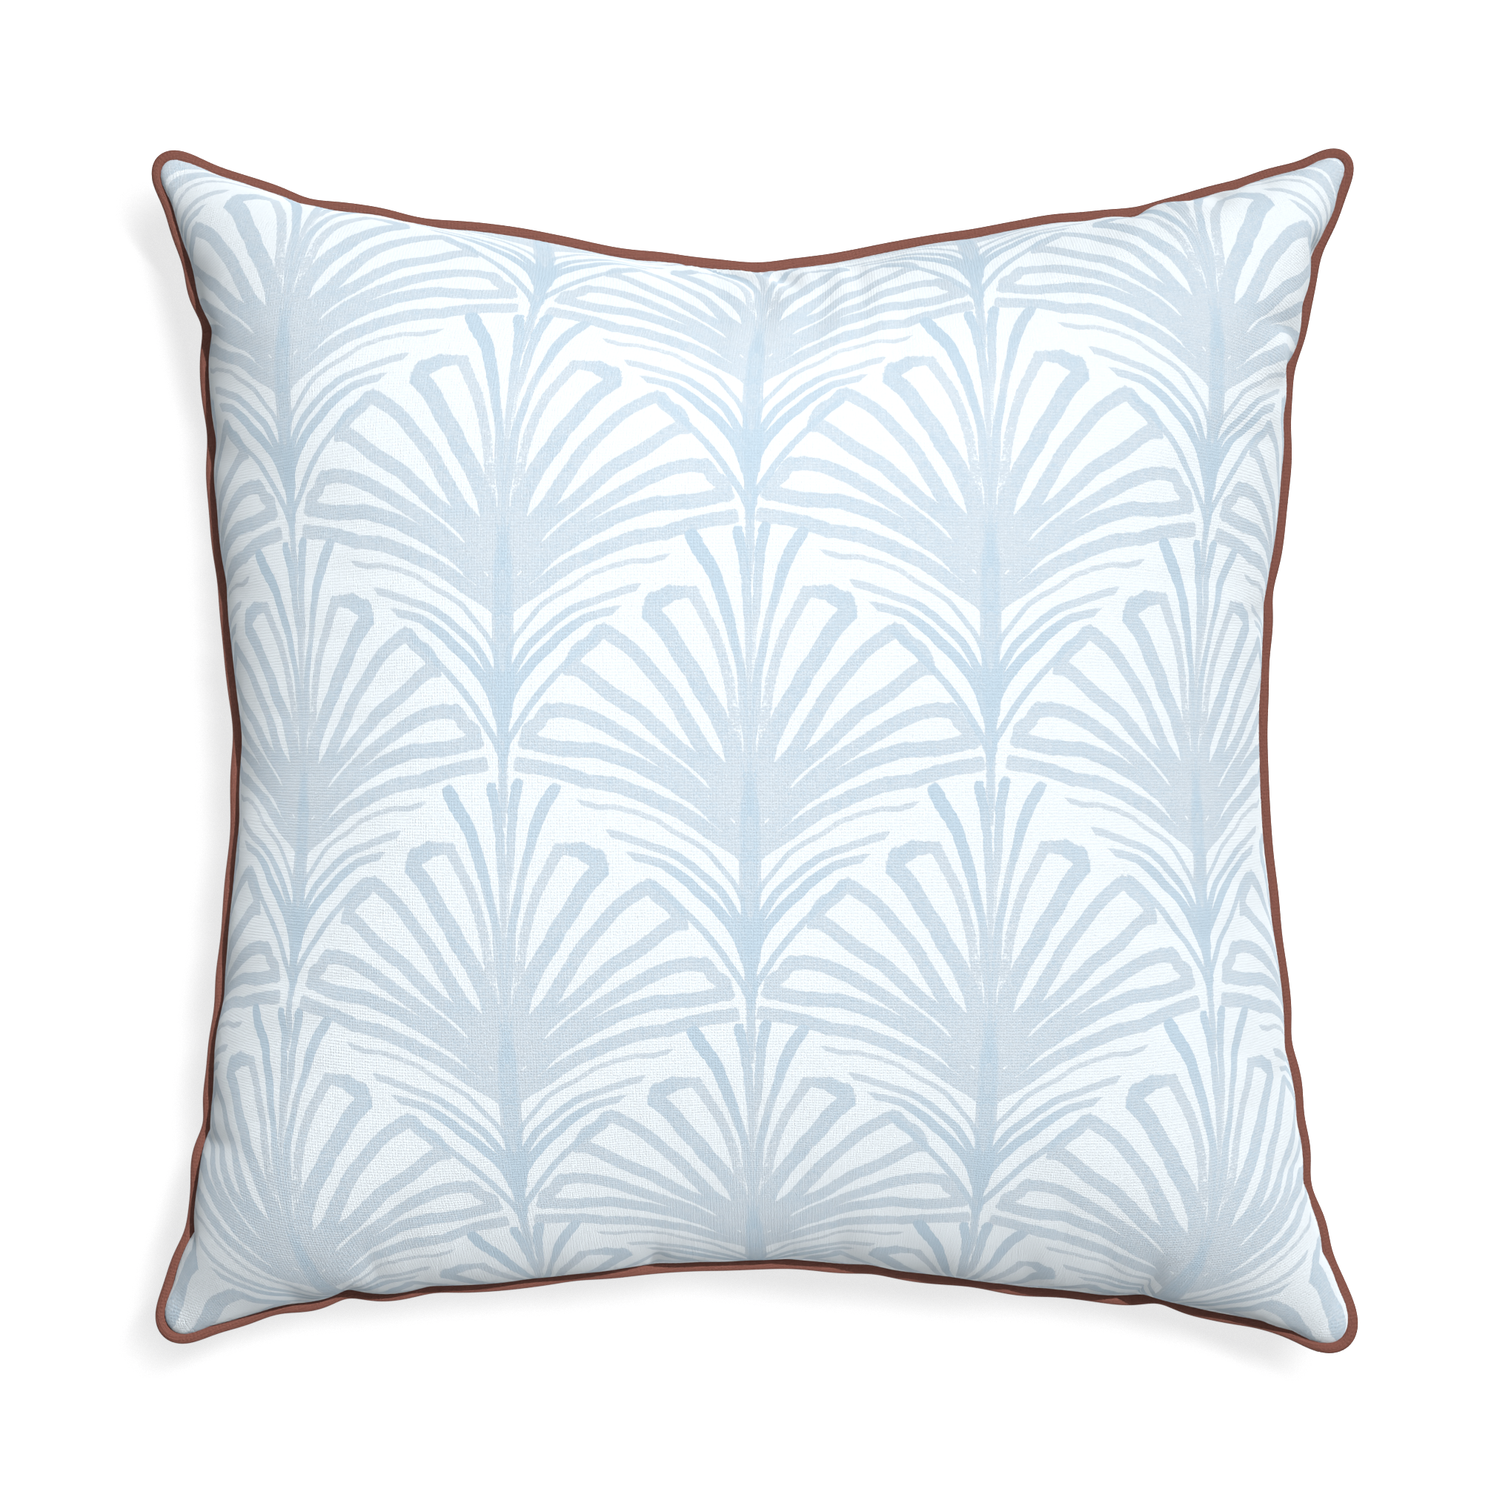 Euro-sham suzy sky custom pillow with w piping on white background